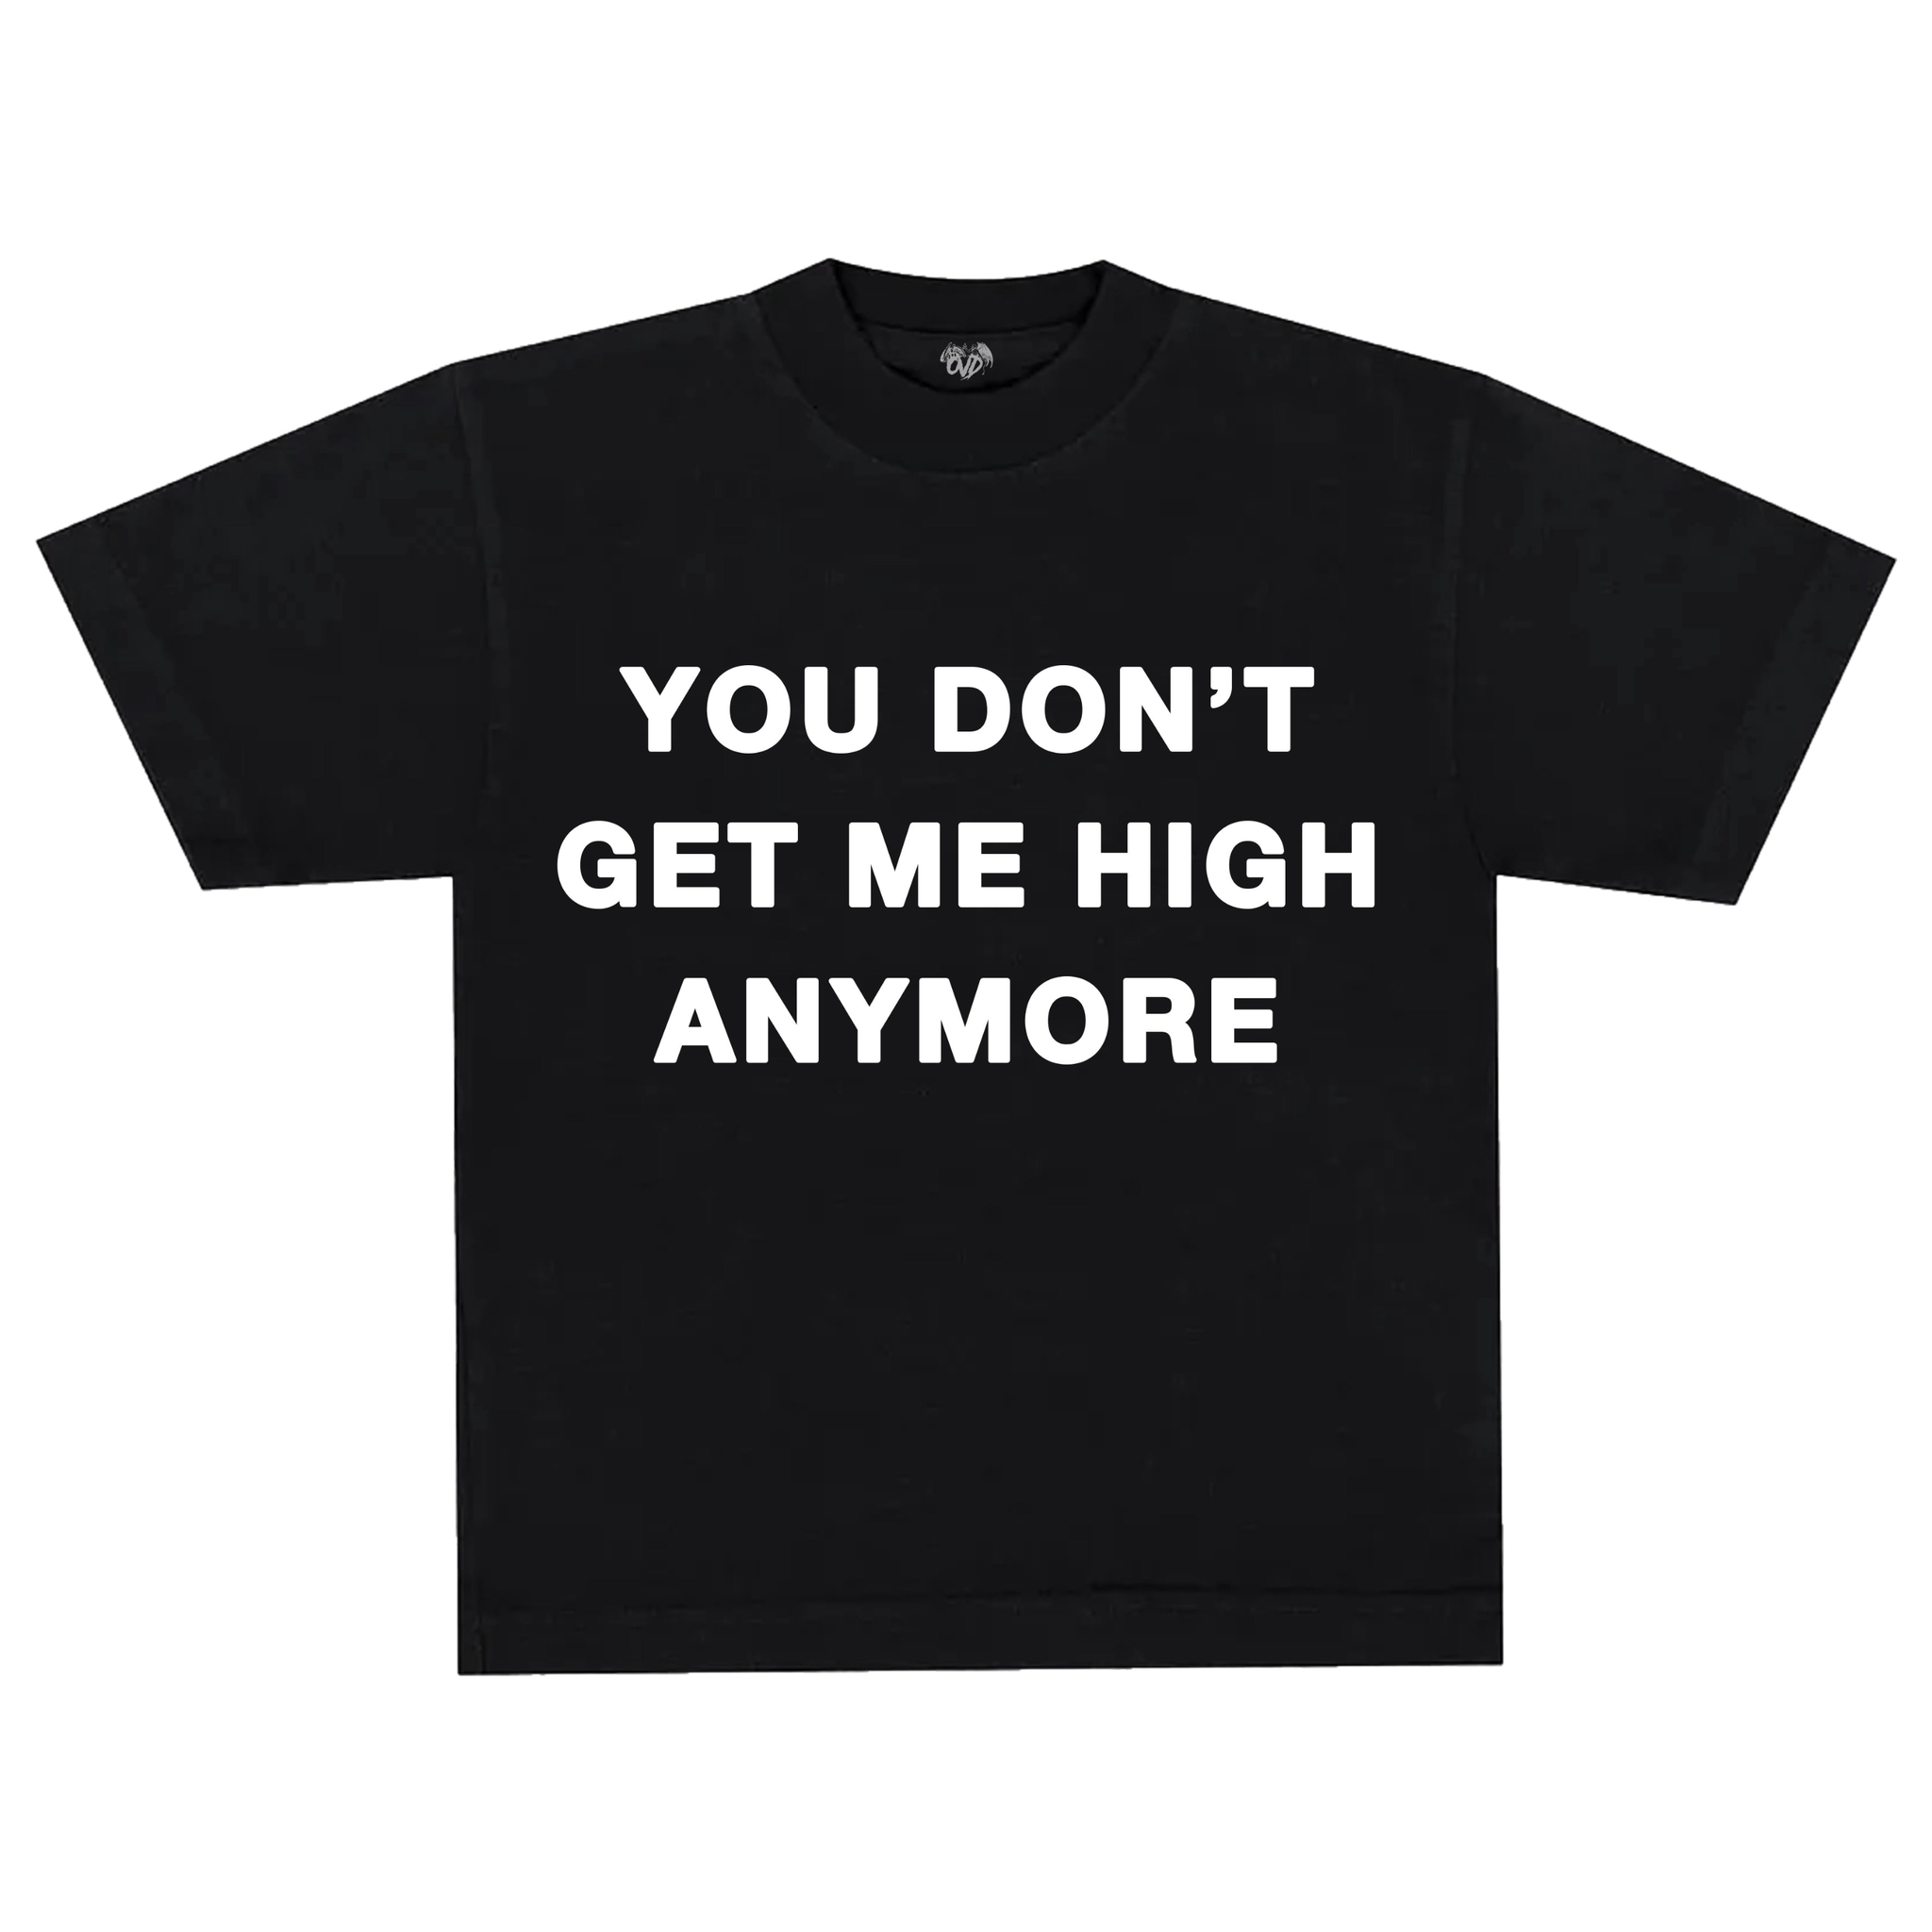 "YOU DON'T GET ME HIGH ANYMORE" - BLACK TEE